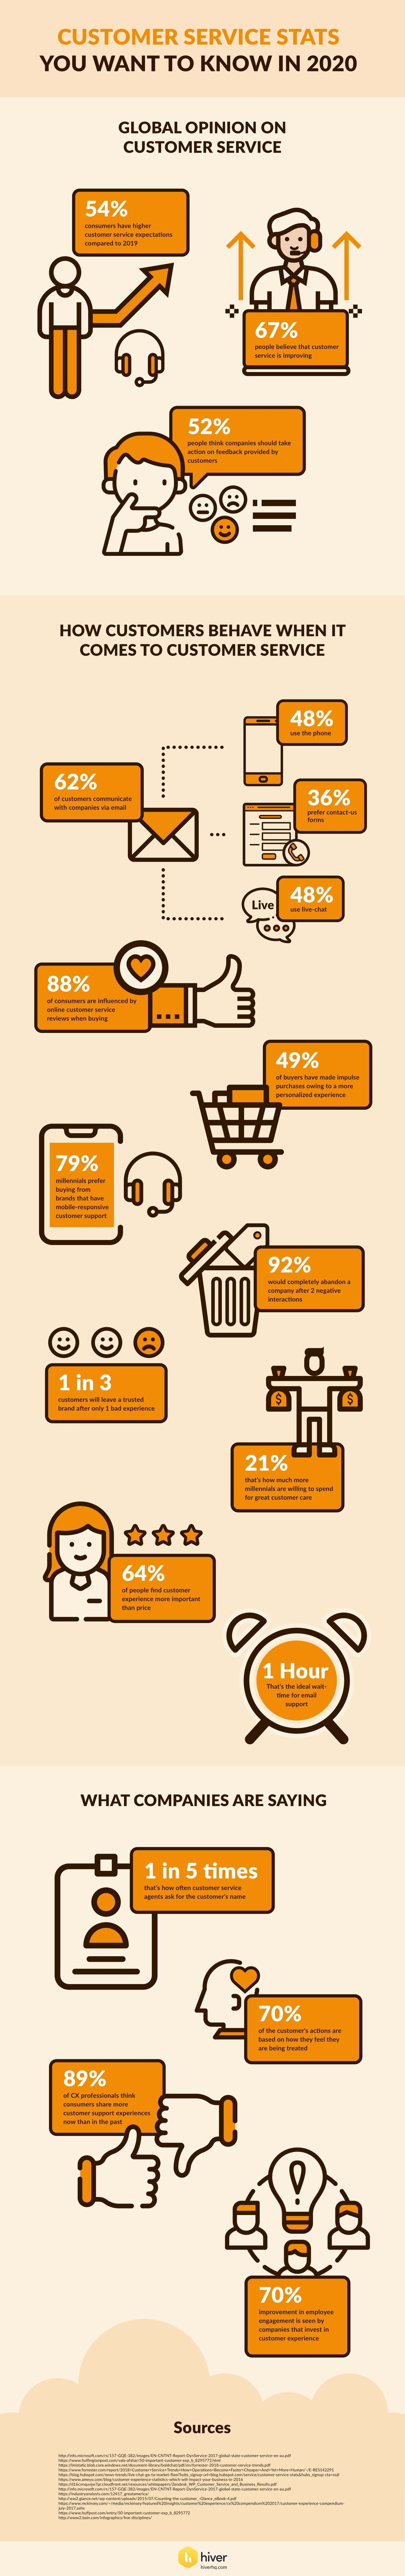 Customer service stats in 2020 infographic